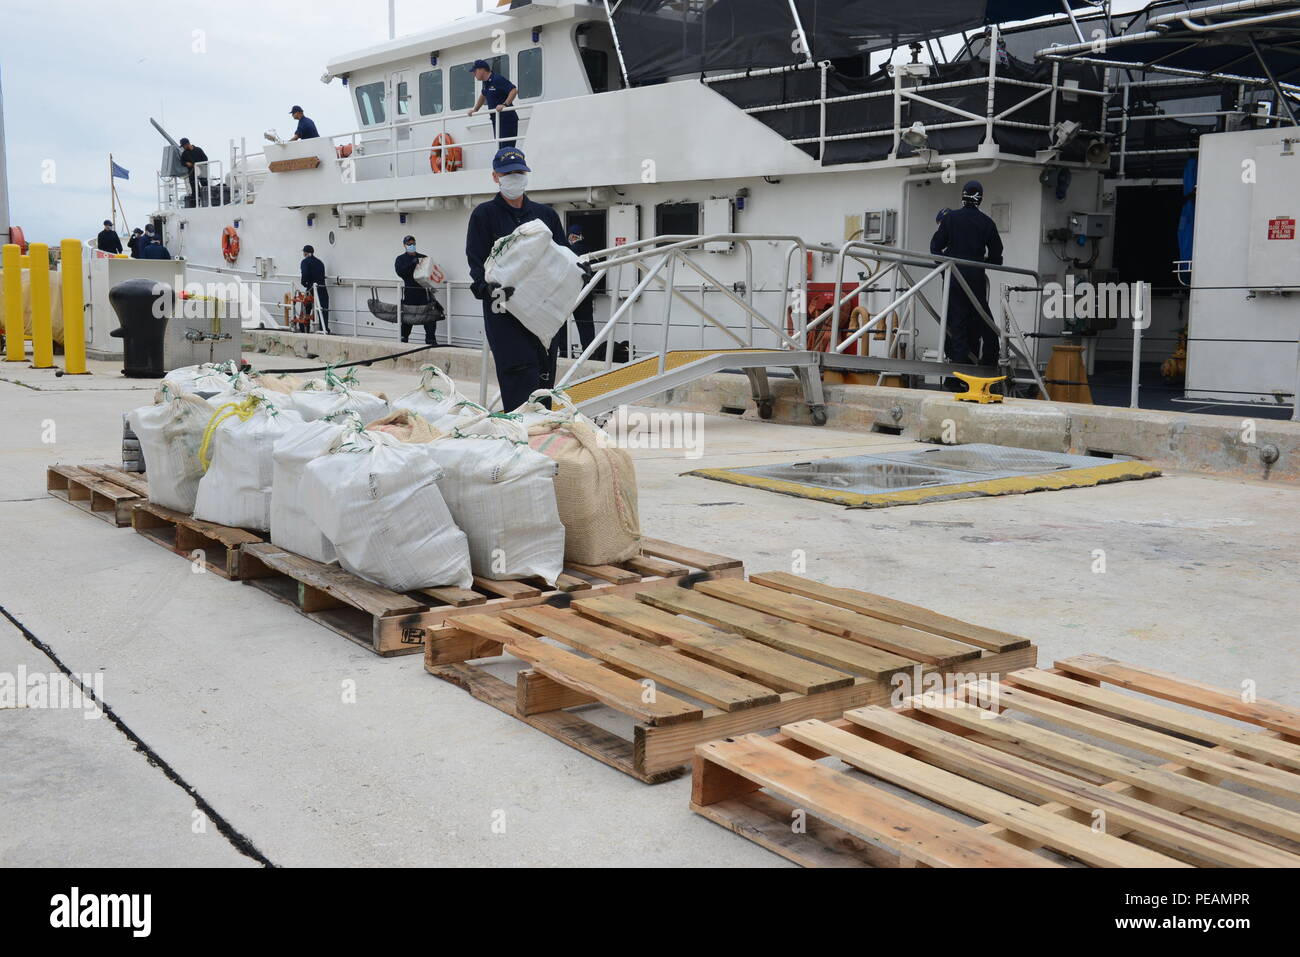 Coast Guardsmen aboard the Coast Guard Cutter Webber offload cocaine at Coast Guard Sector Miami Beach, Fla., Nov. 20, 2015. The HNLMS Friesland, an offshore patrol vessel from the Royal Netherlands Navy, interdicted a go-fast vessel with four suspected smugglers and 22 bales of cocaine with an estimated wholesale value of $17 million. (U.S. Coast Guard photo by Petty Officer 2nd Class Mark Barney) Stock Photo